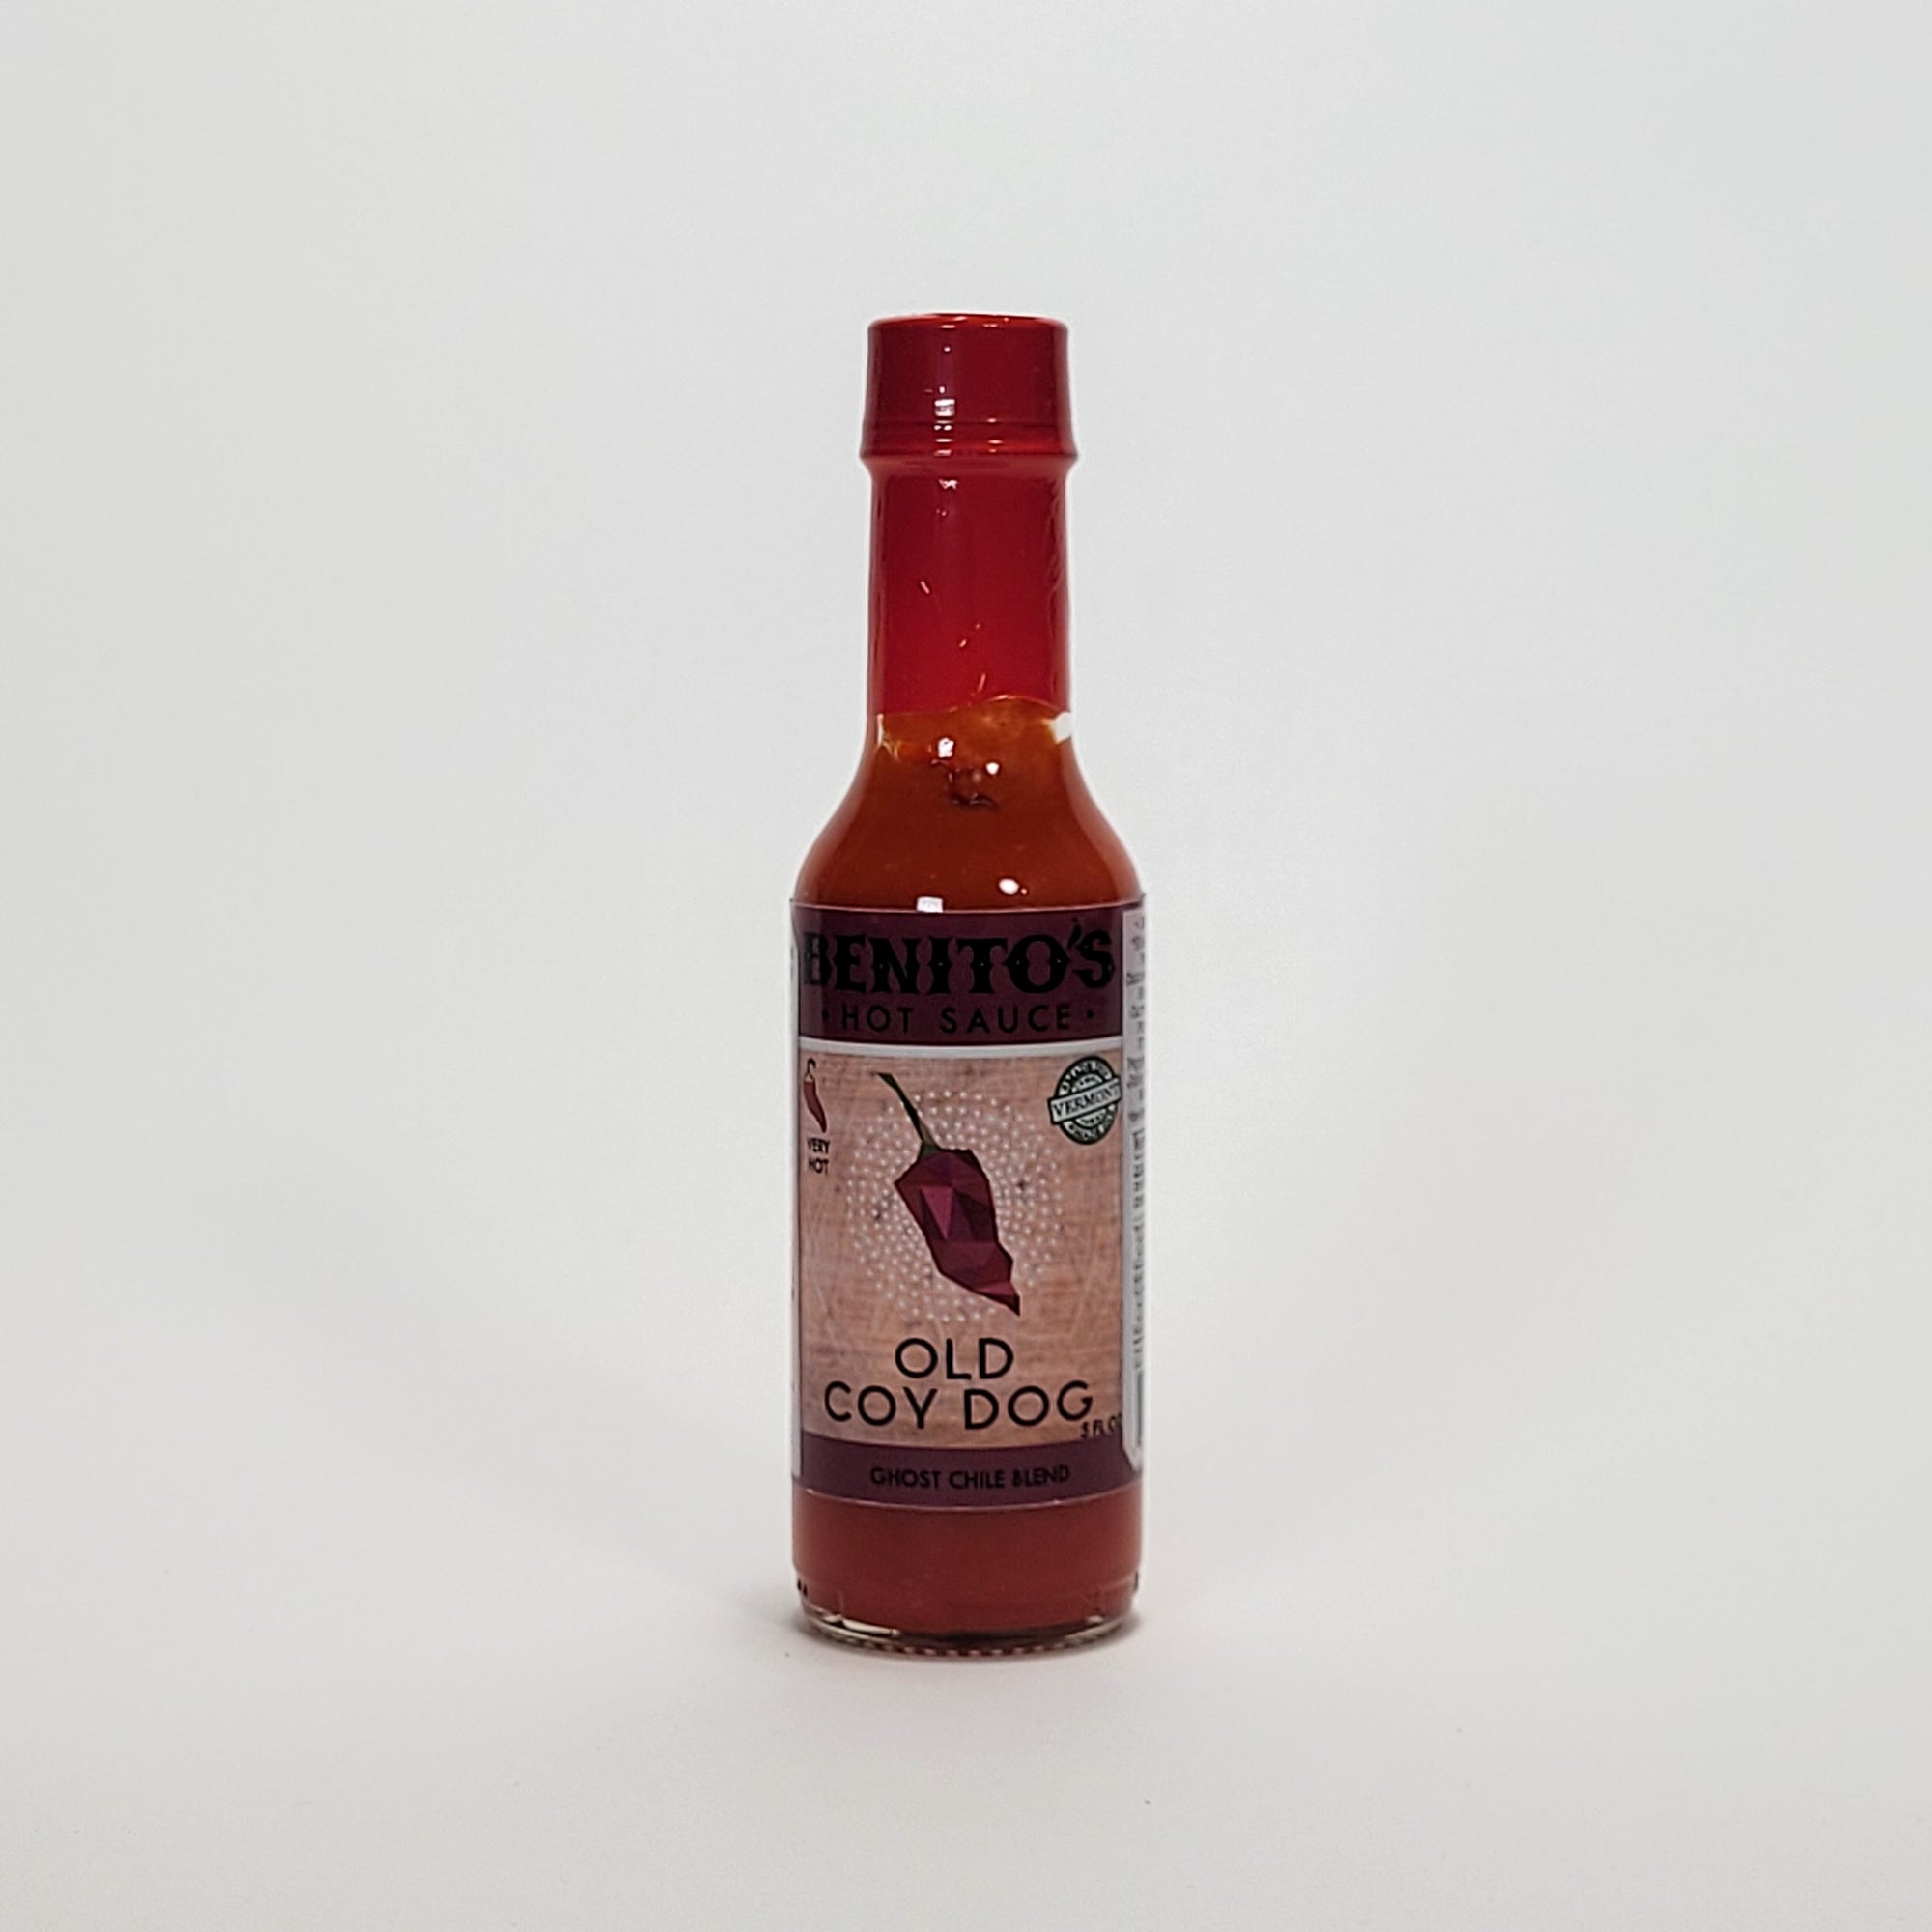 Benito's Old Coy Dog hot sauce